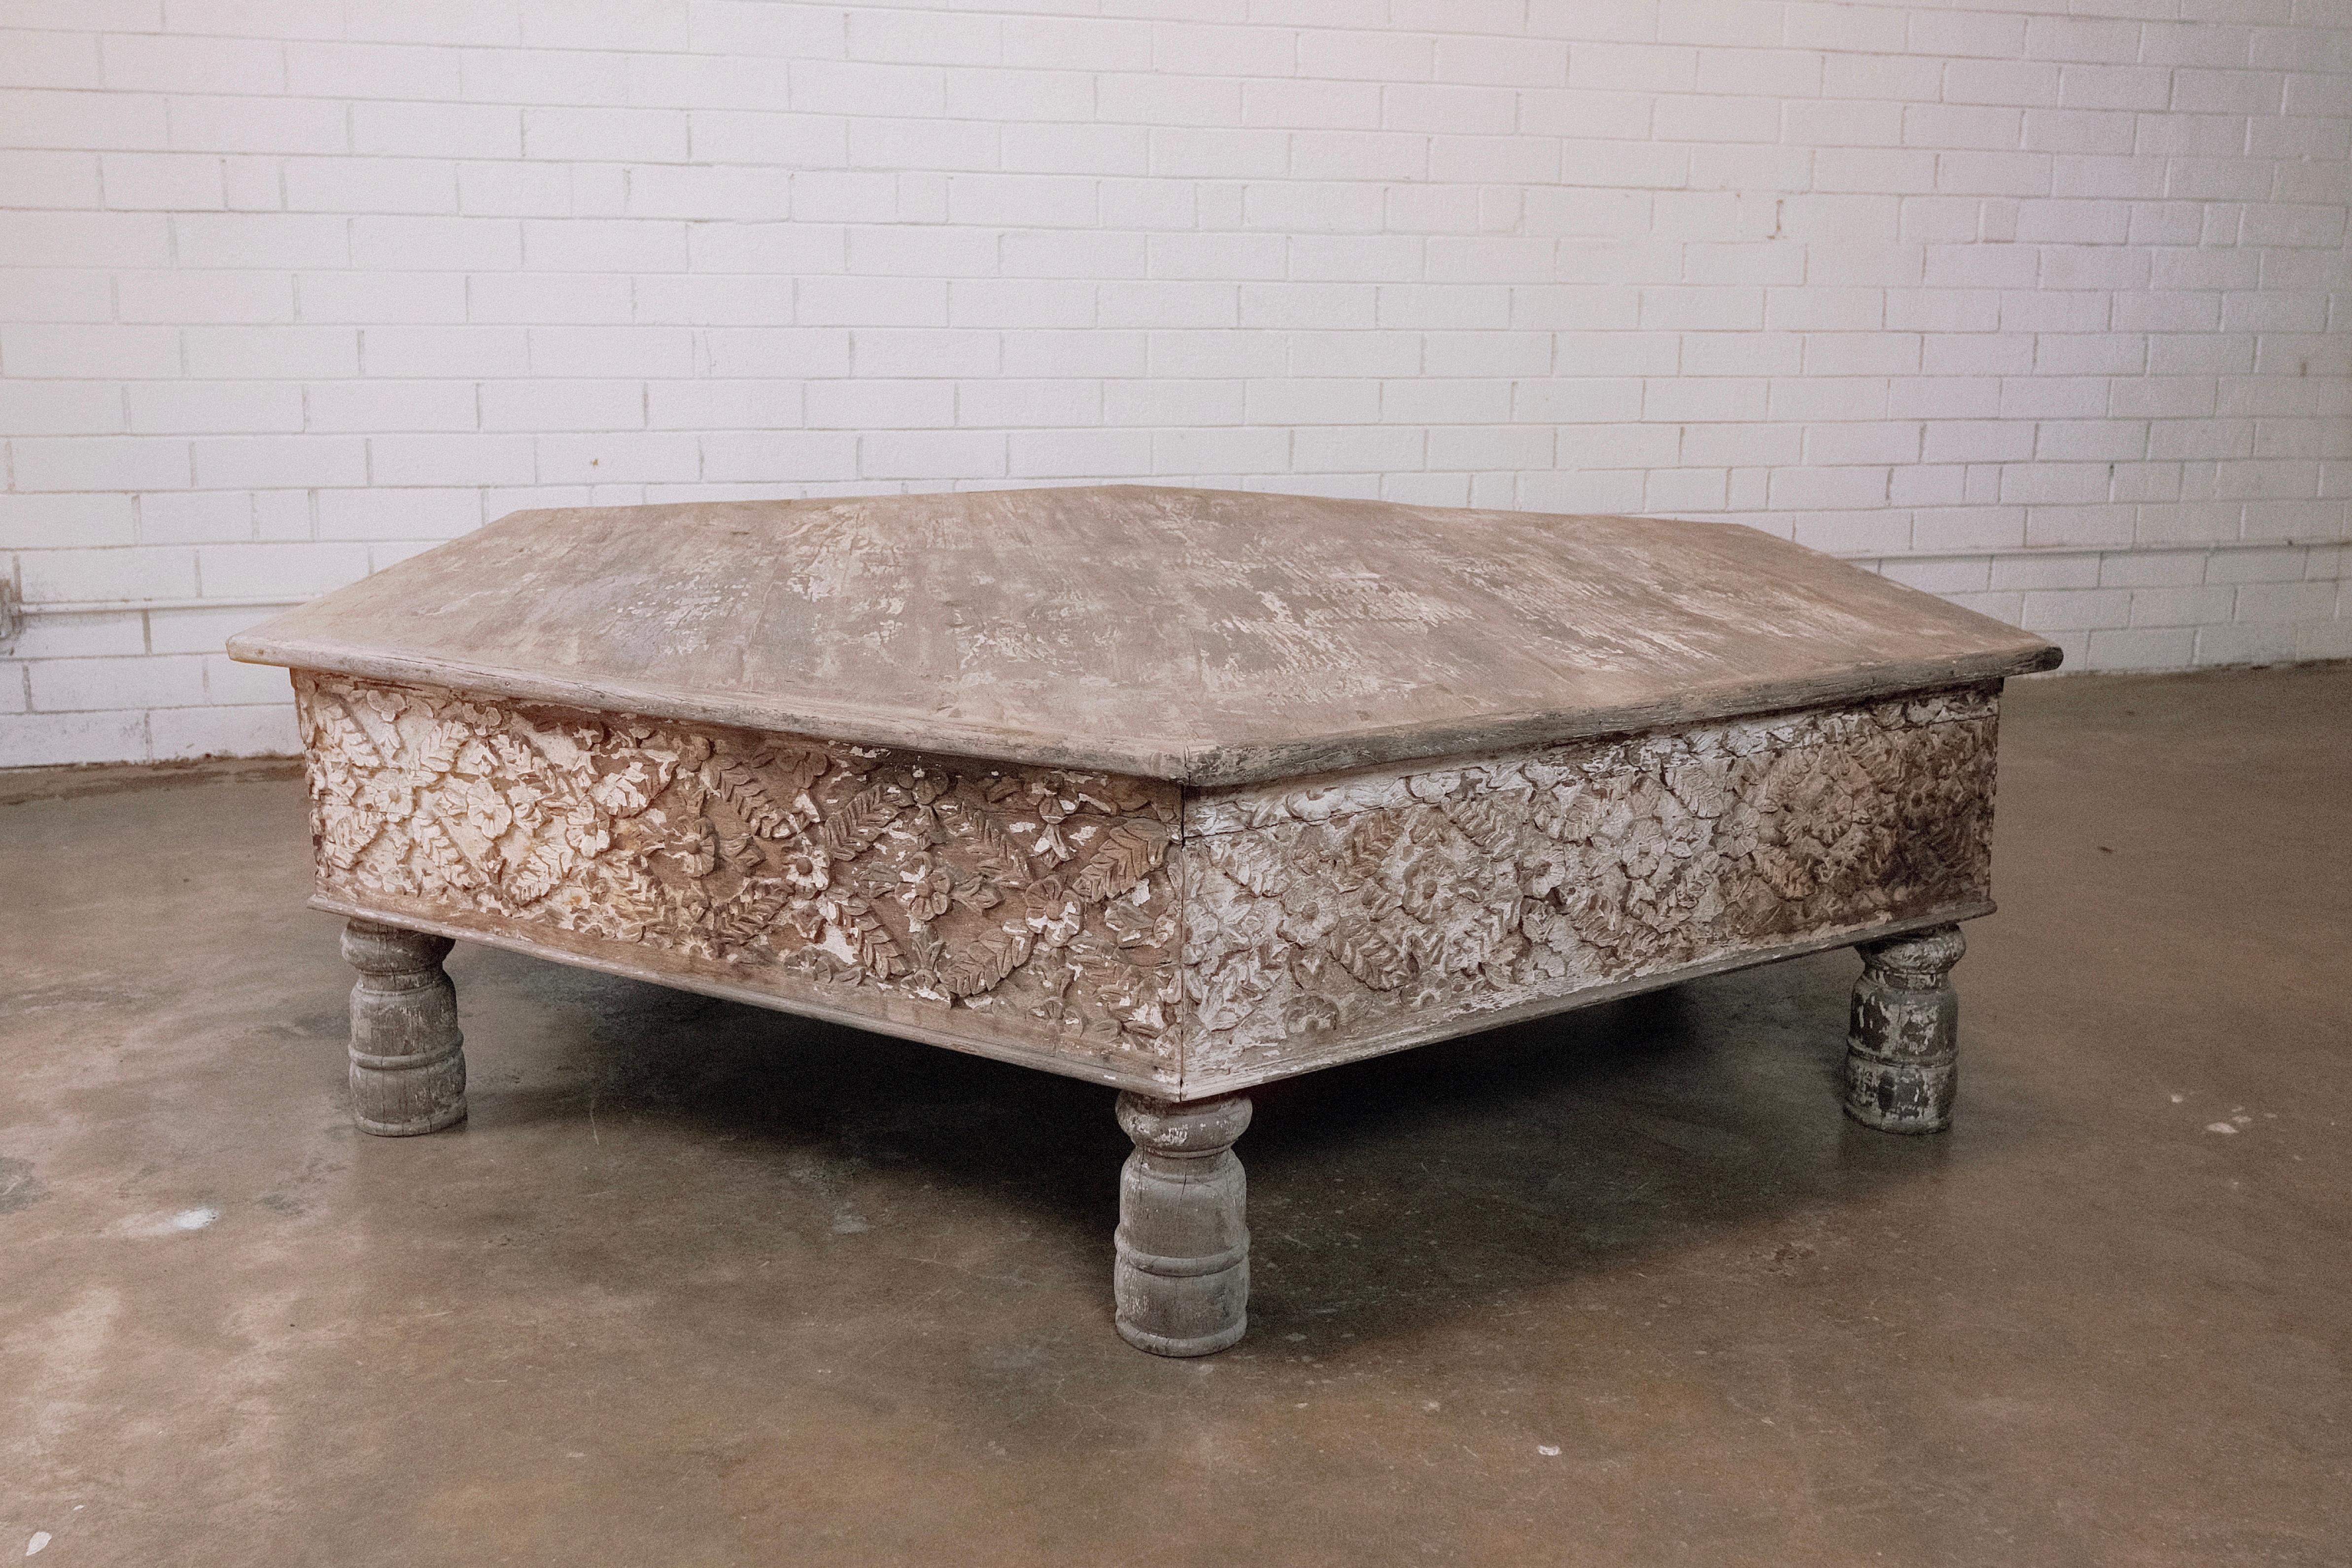 An exquisite vintage hexagonal Moorish masterpiece, this coffee table blends intricate geometric patterns with a rich patina to create a captivating centerpiece for any space. Its unique hexagonal shape adds a touch of sophistication and originality